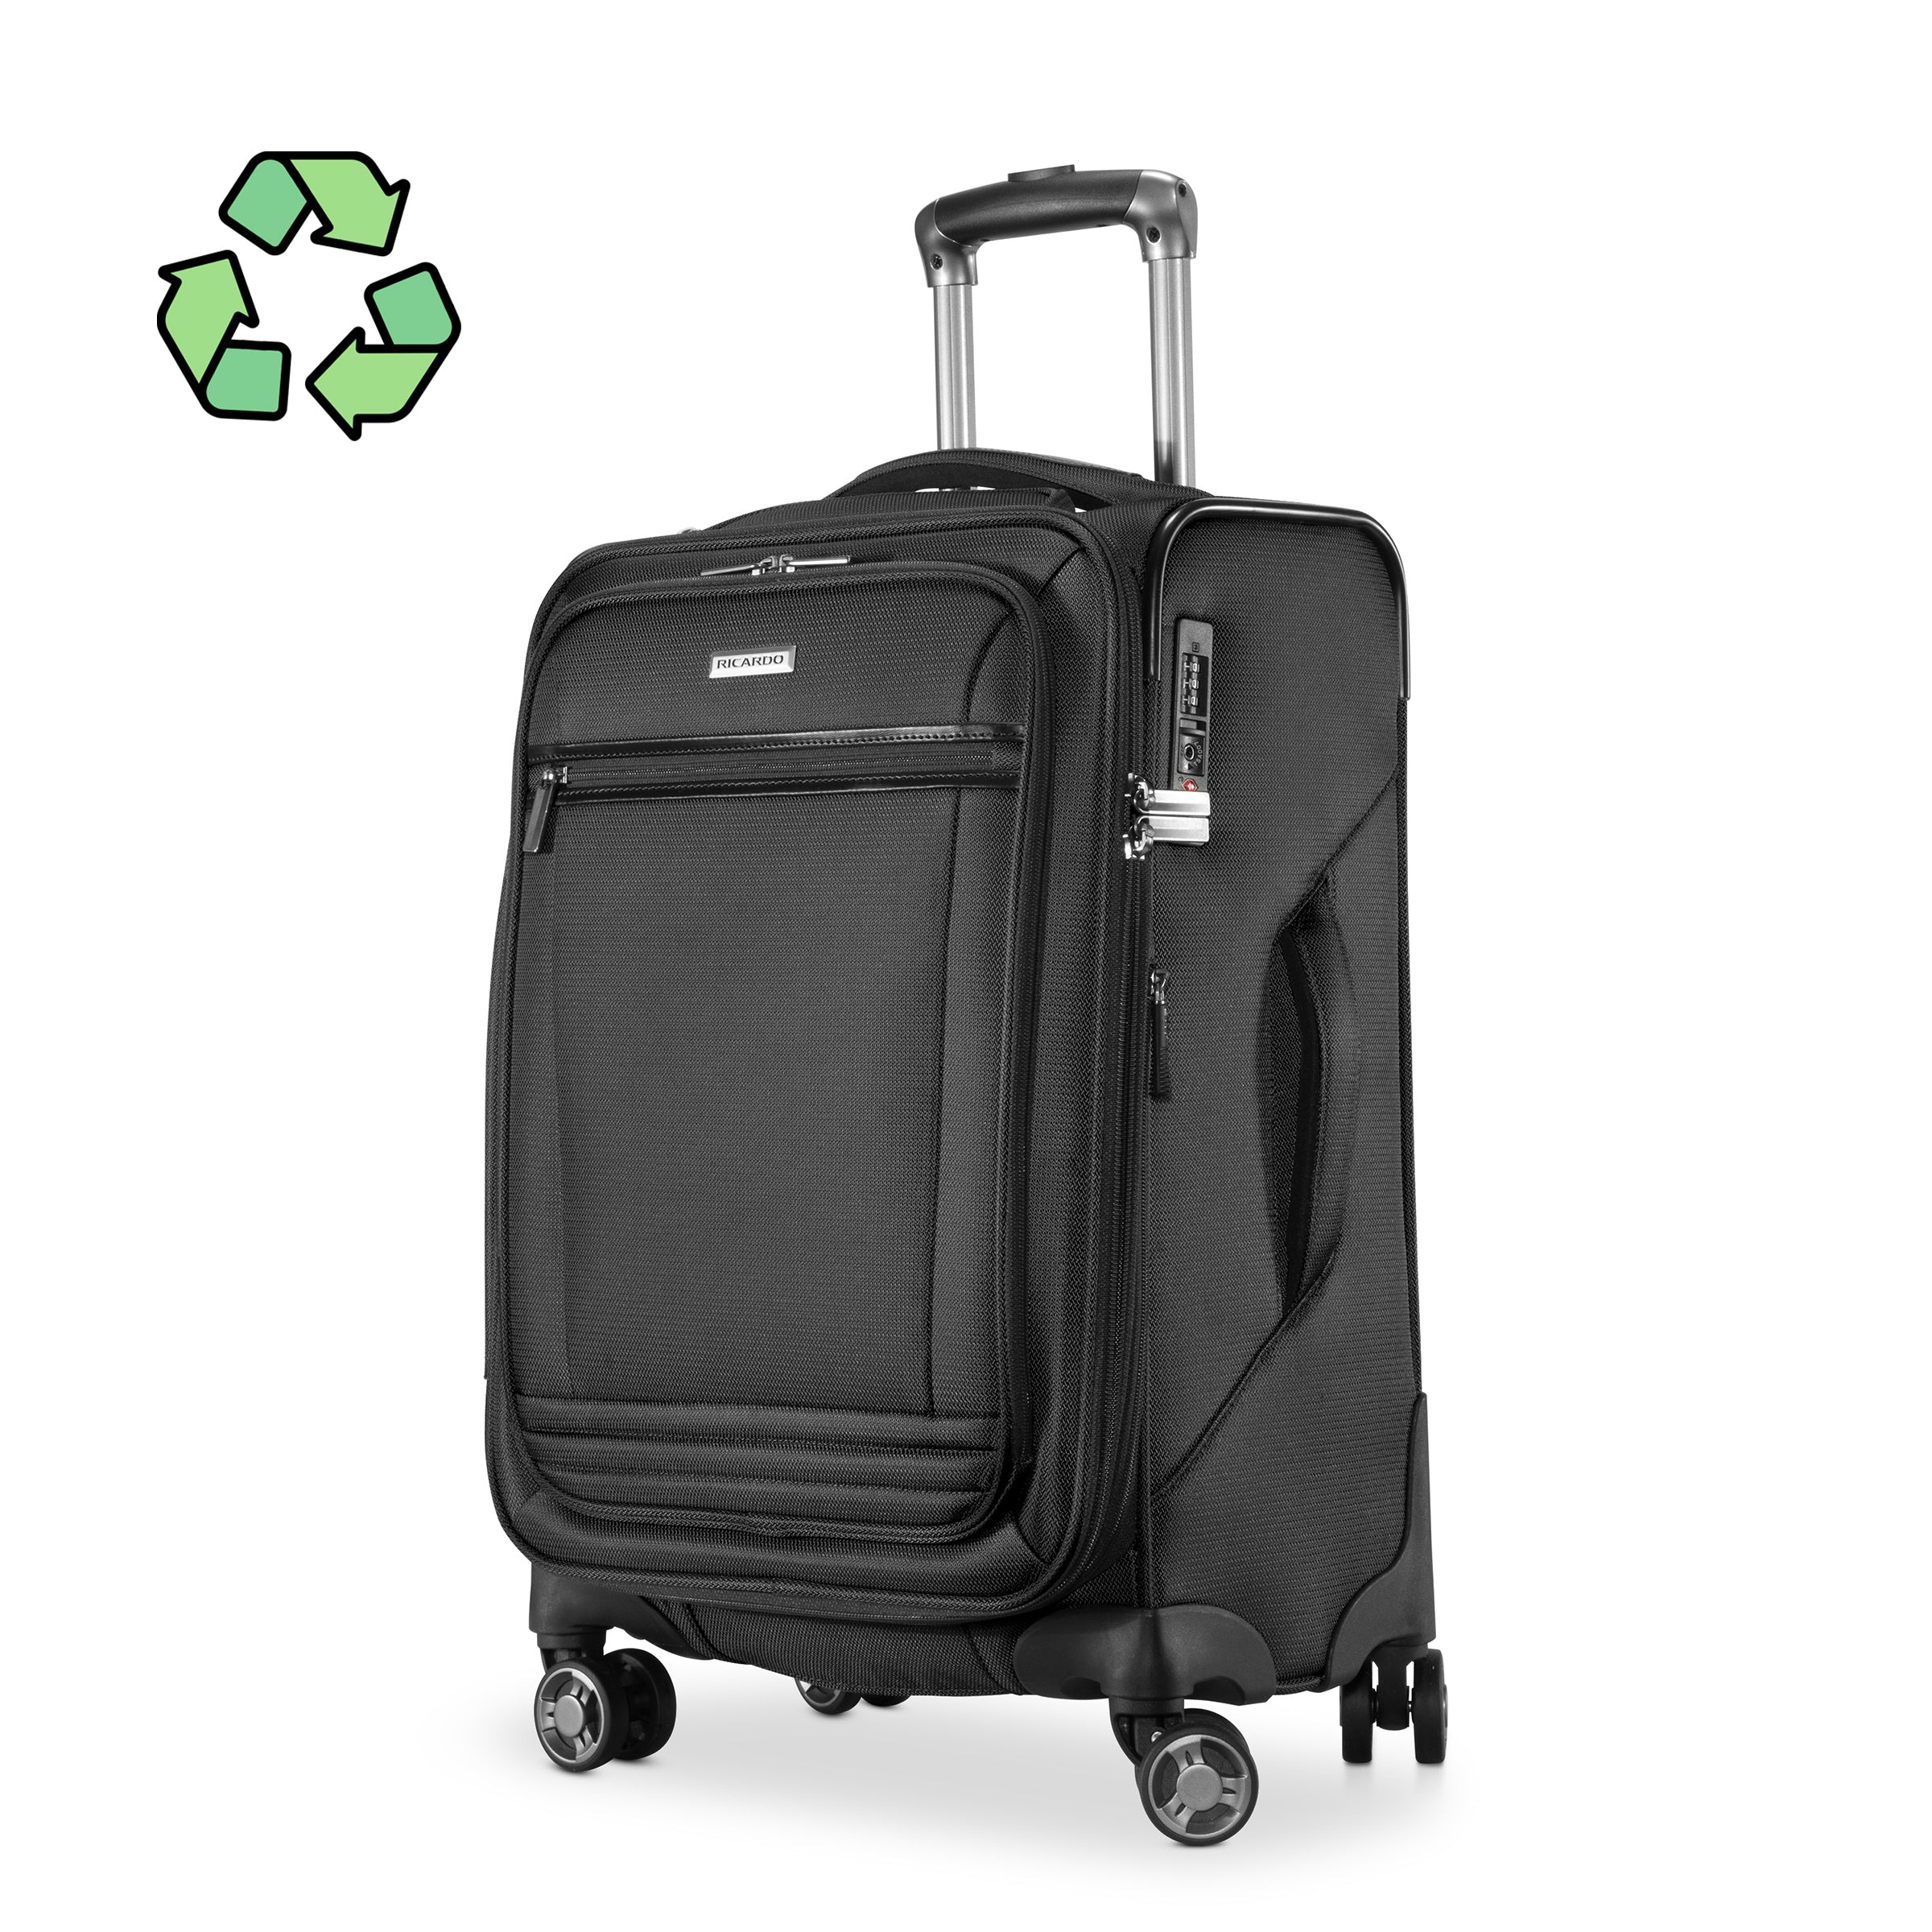 The best hard-shell carry-on luggage of 2024, tested by editors | CNN  Underscored